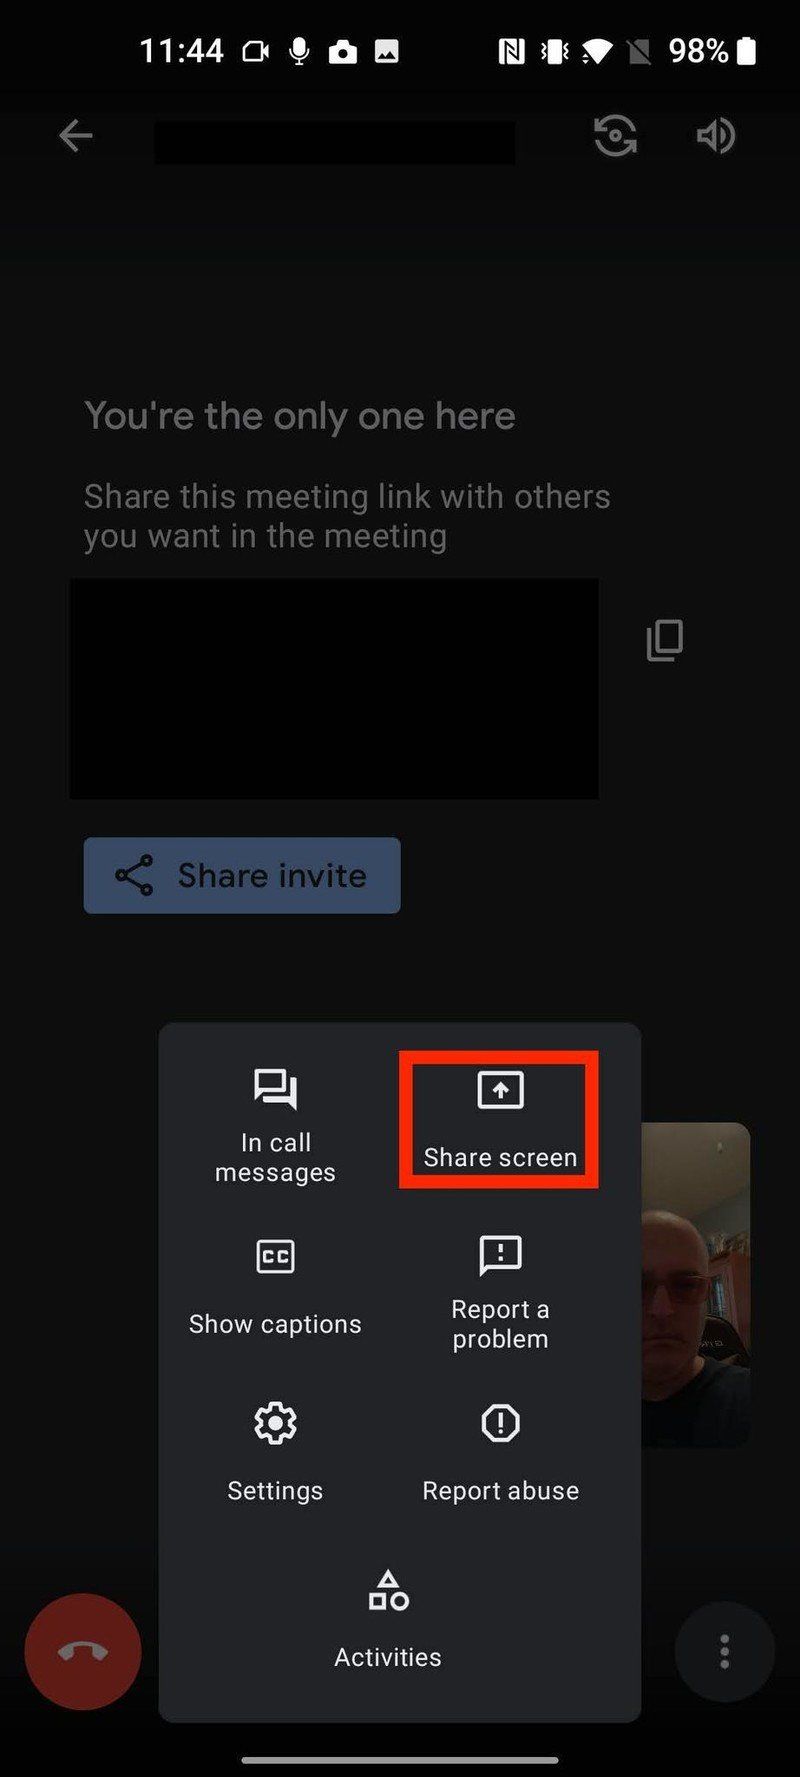 Select "Share screen" from the options. This will display the screen-sharing options.